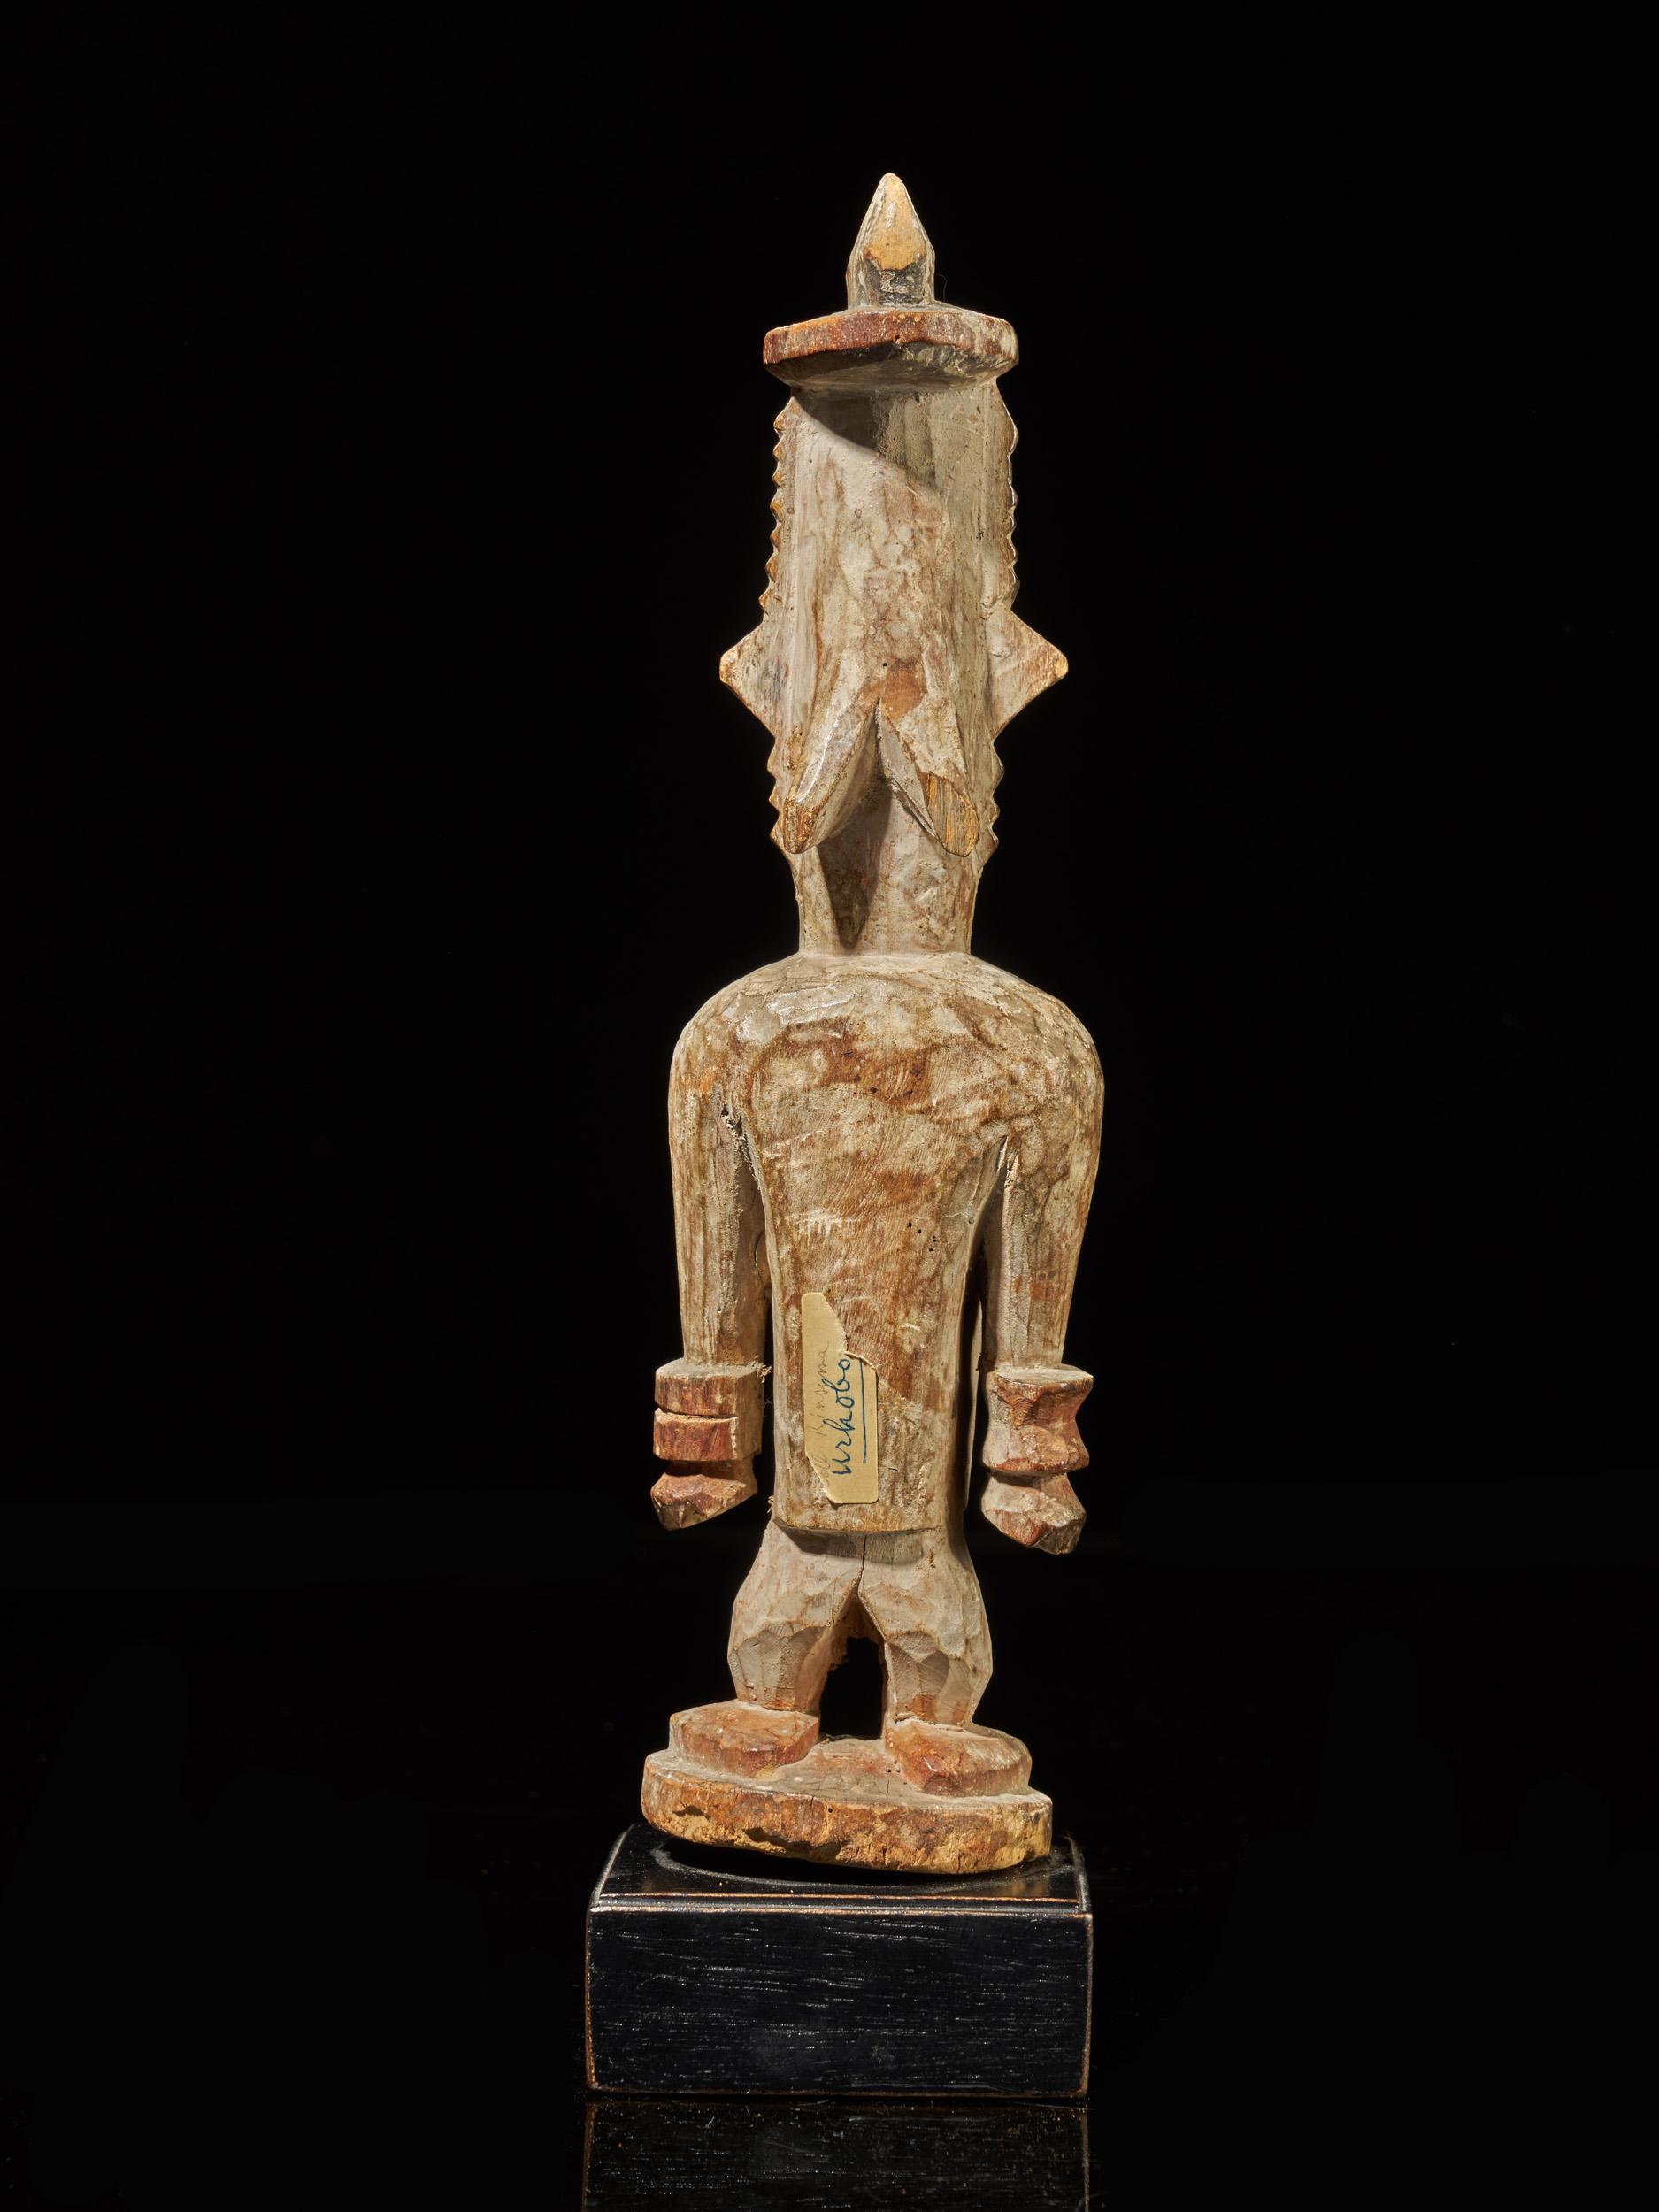 Urhobo People, Nigeria, Family Ancestor Statue with Rests of Kaolin 1